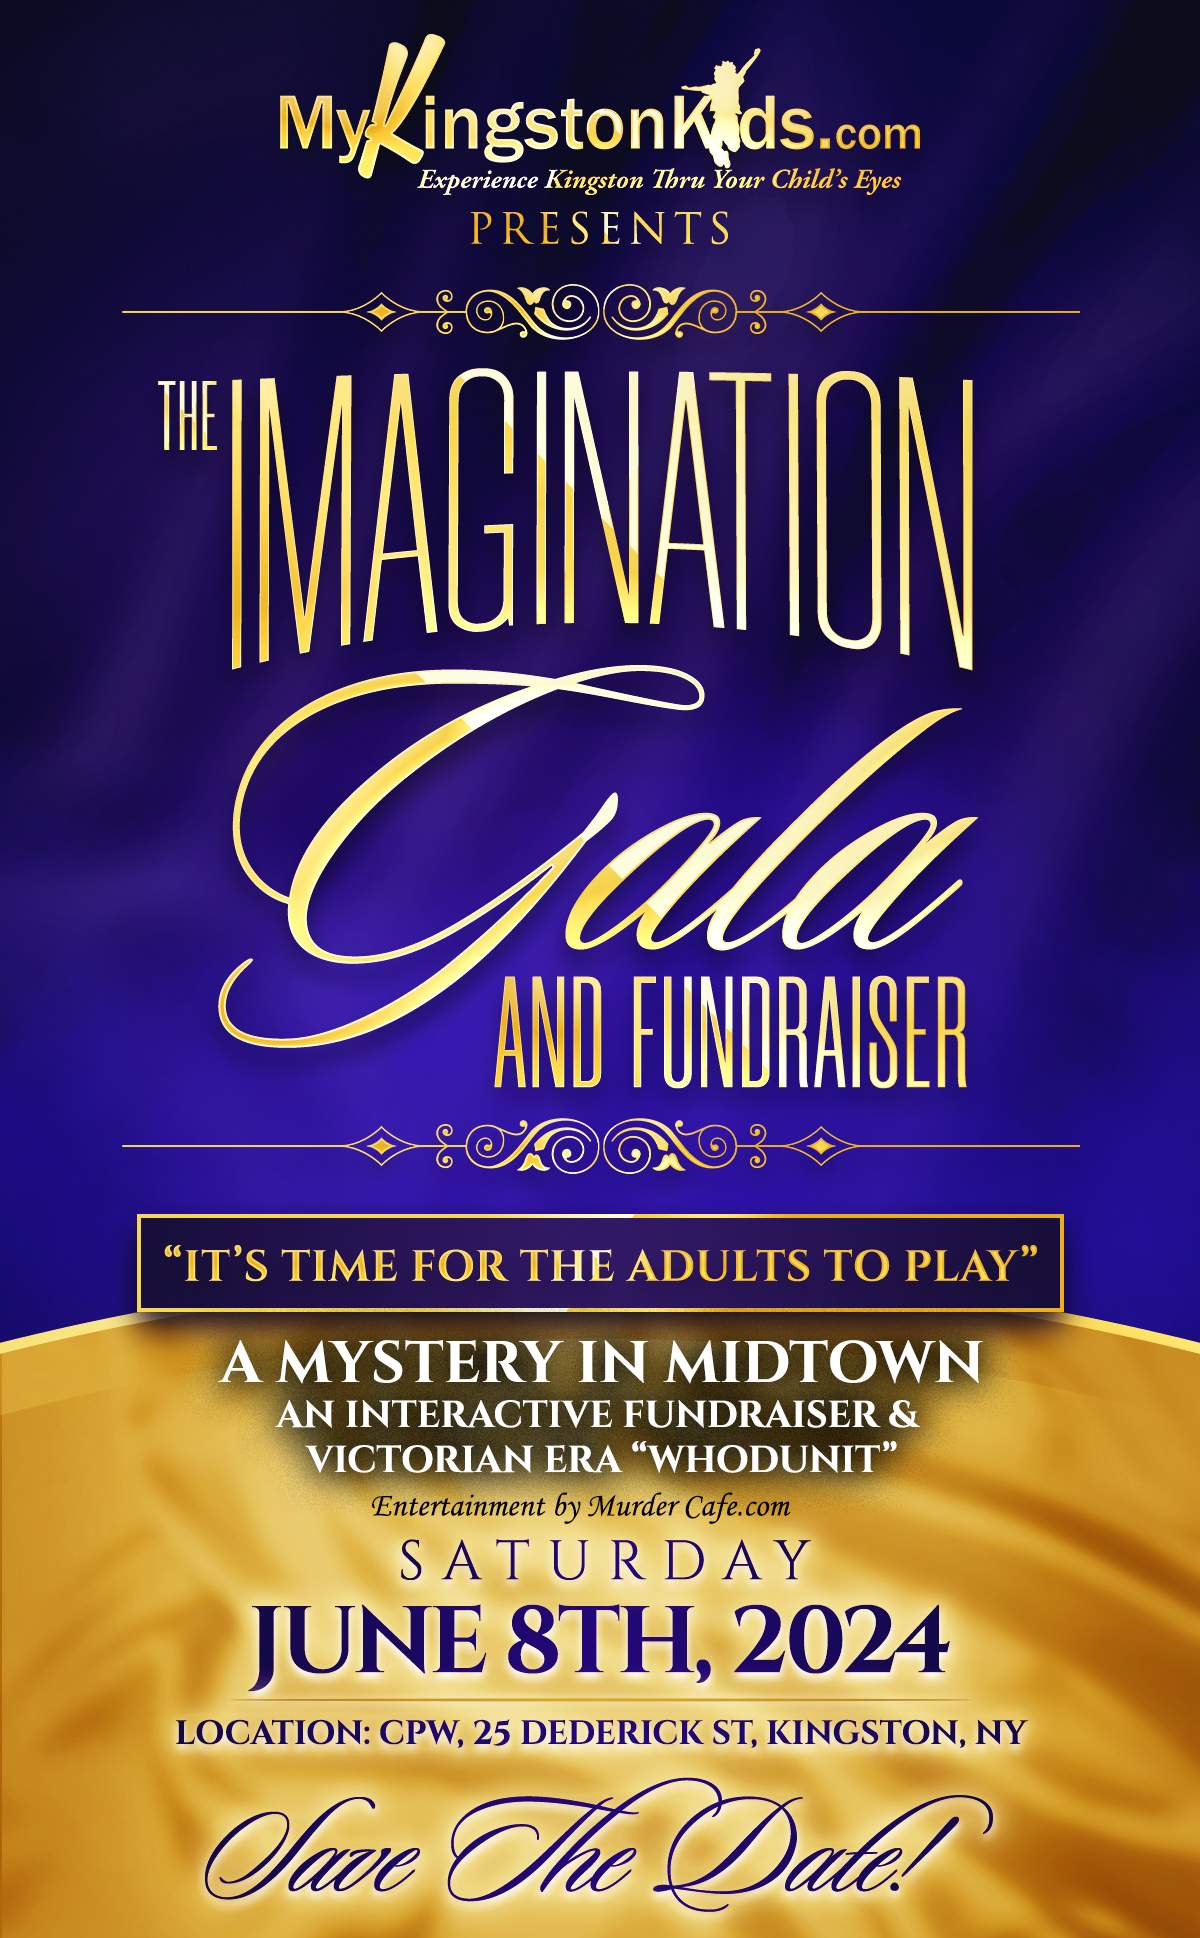 Gala and fundraiser event flyer